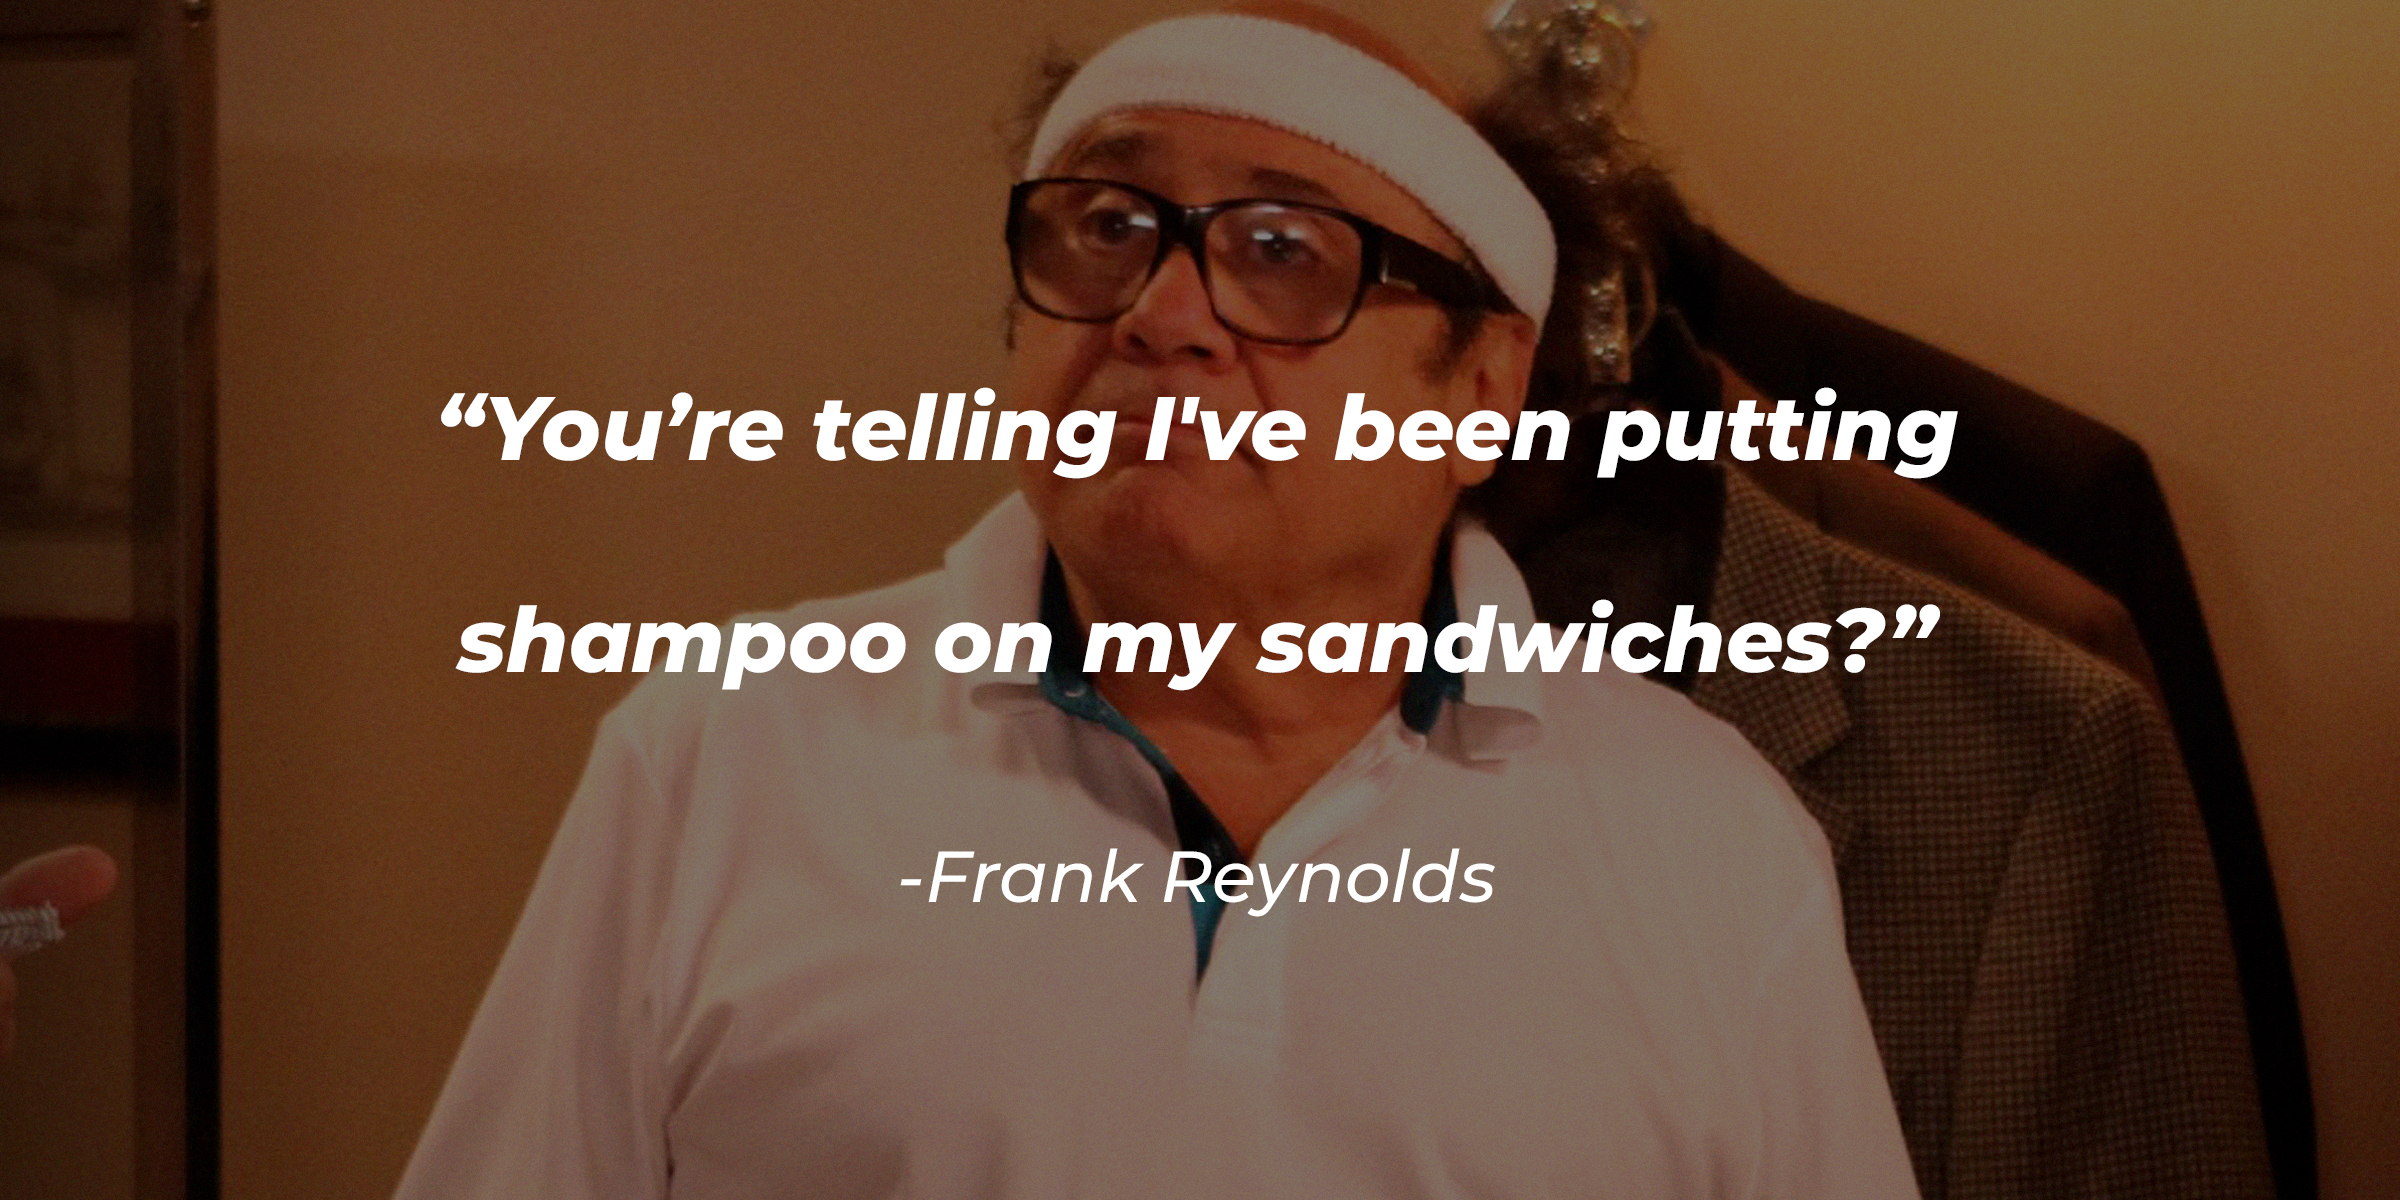 A photo of Frank Reynolds with the quote: “You’re telling I've been putting shampoo on my sandwiches?” | Source: facebook.com/alwayssunny